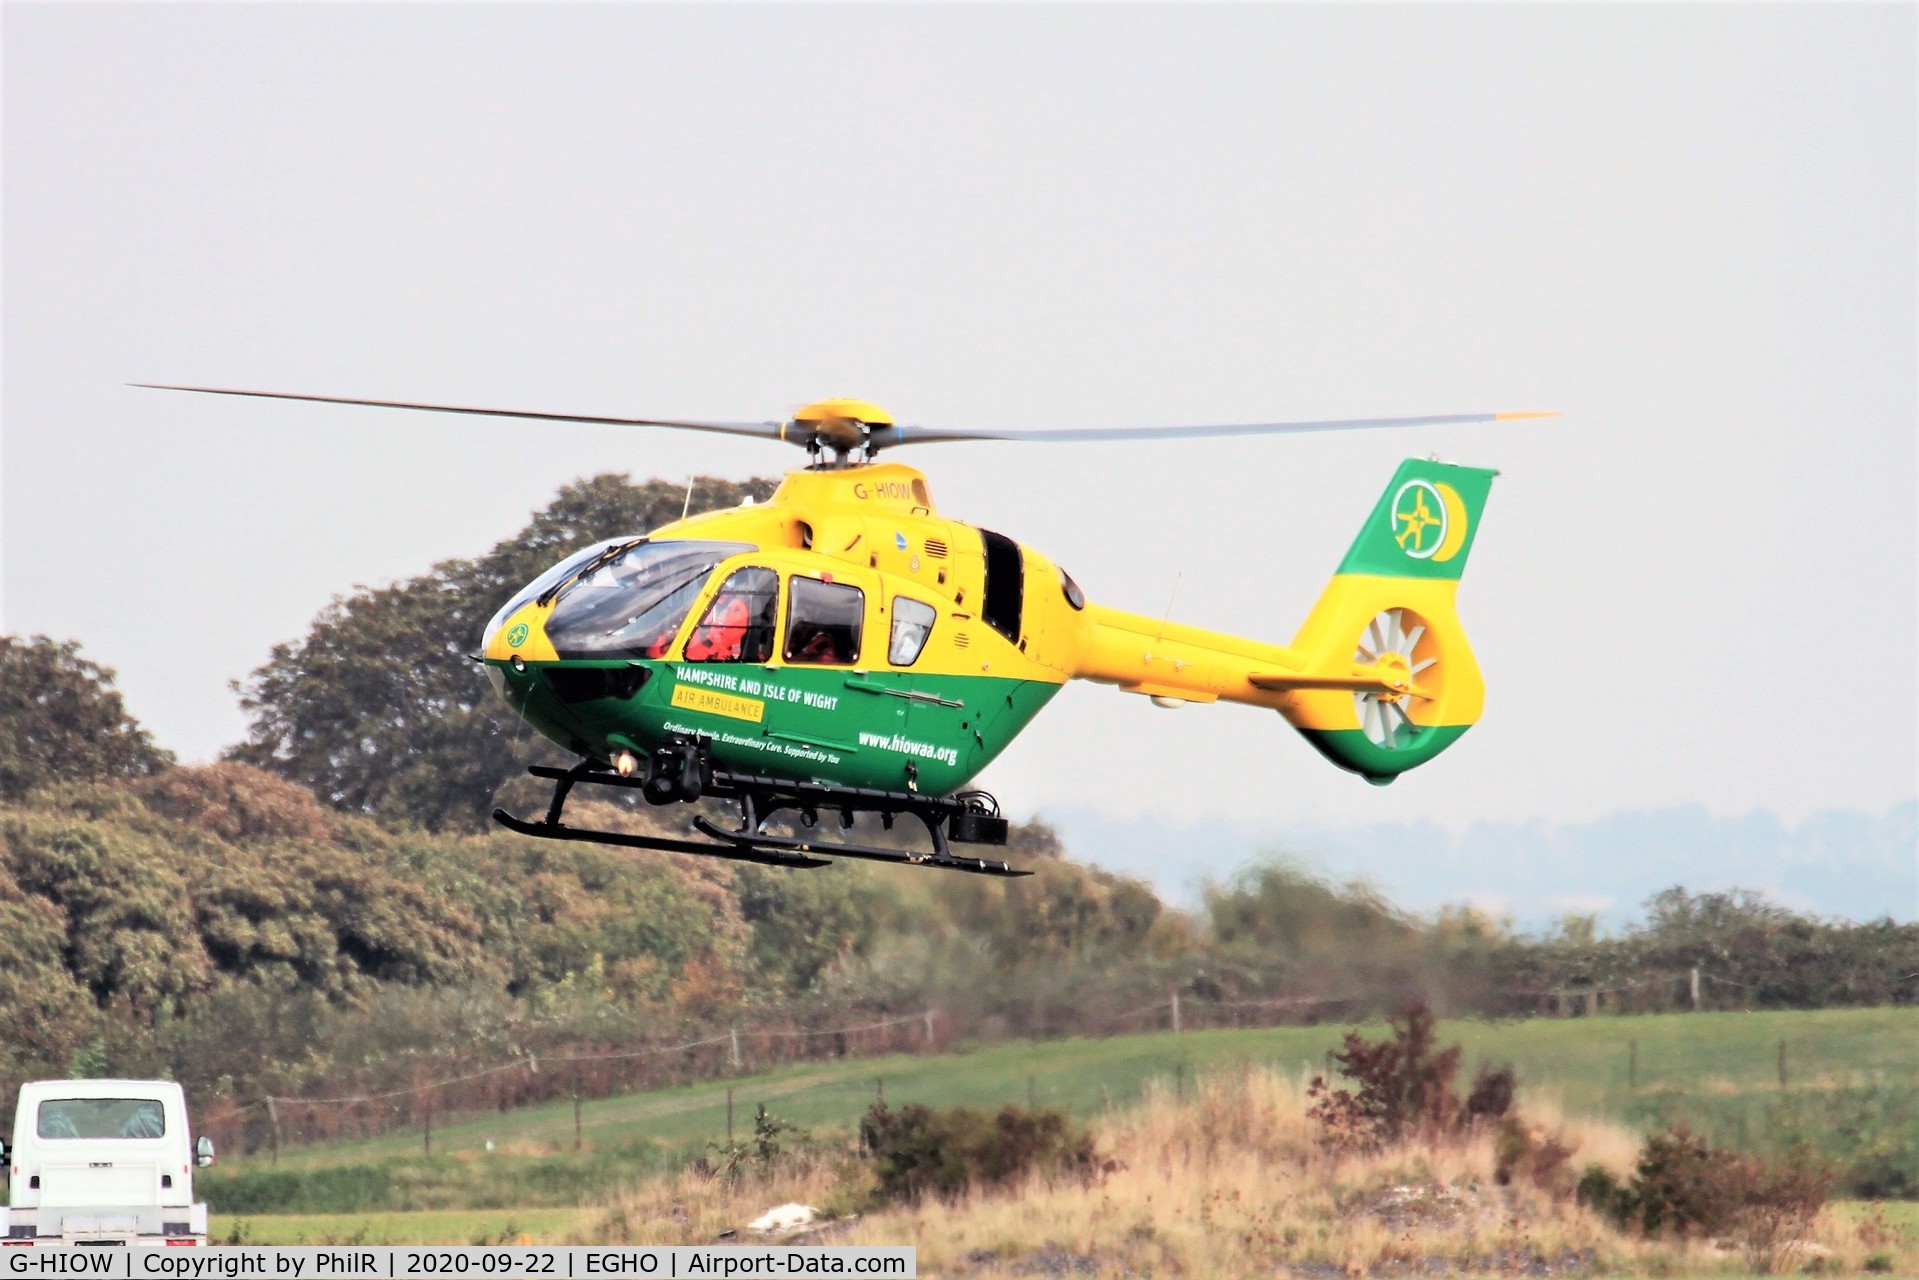 G-HIOW, 2015 Airbus Helicopters EC-135T-3 C/N 1190, Air Ambulance returns to base